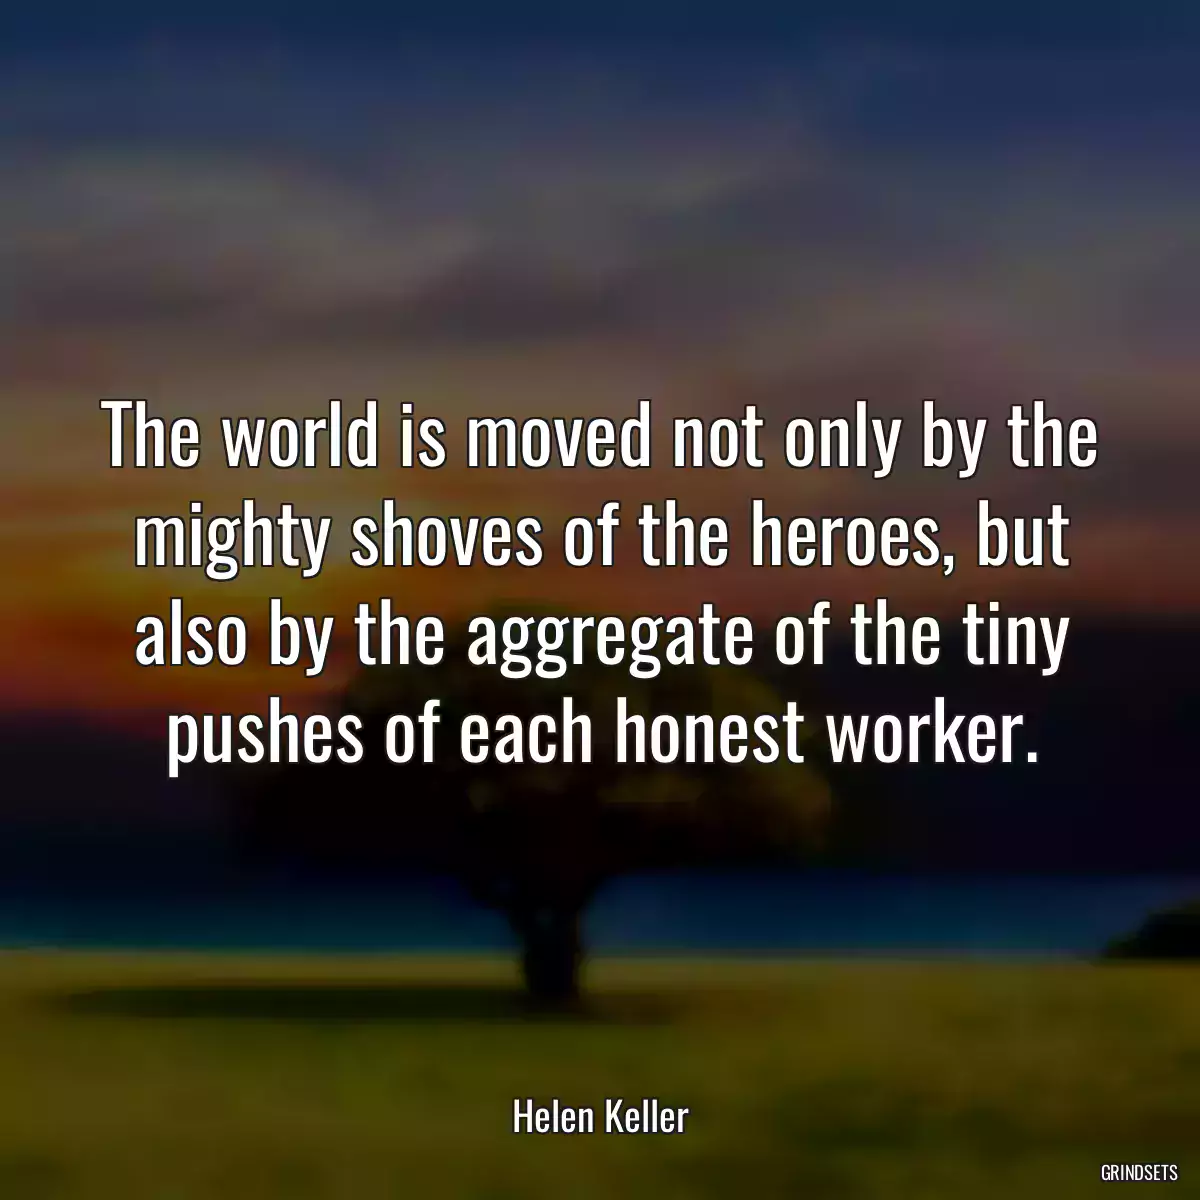 The world is moved not only by the mighty shoves of the heroes, but also by the aggregate of the tiny pushes of each honest worker.